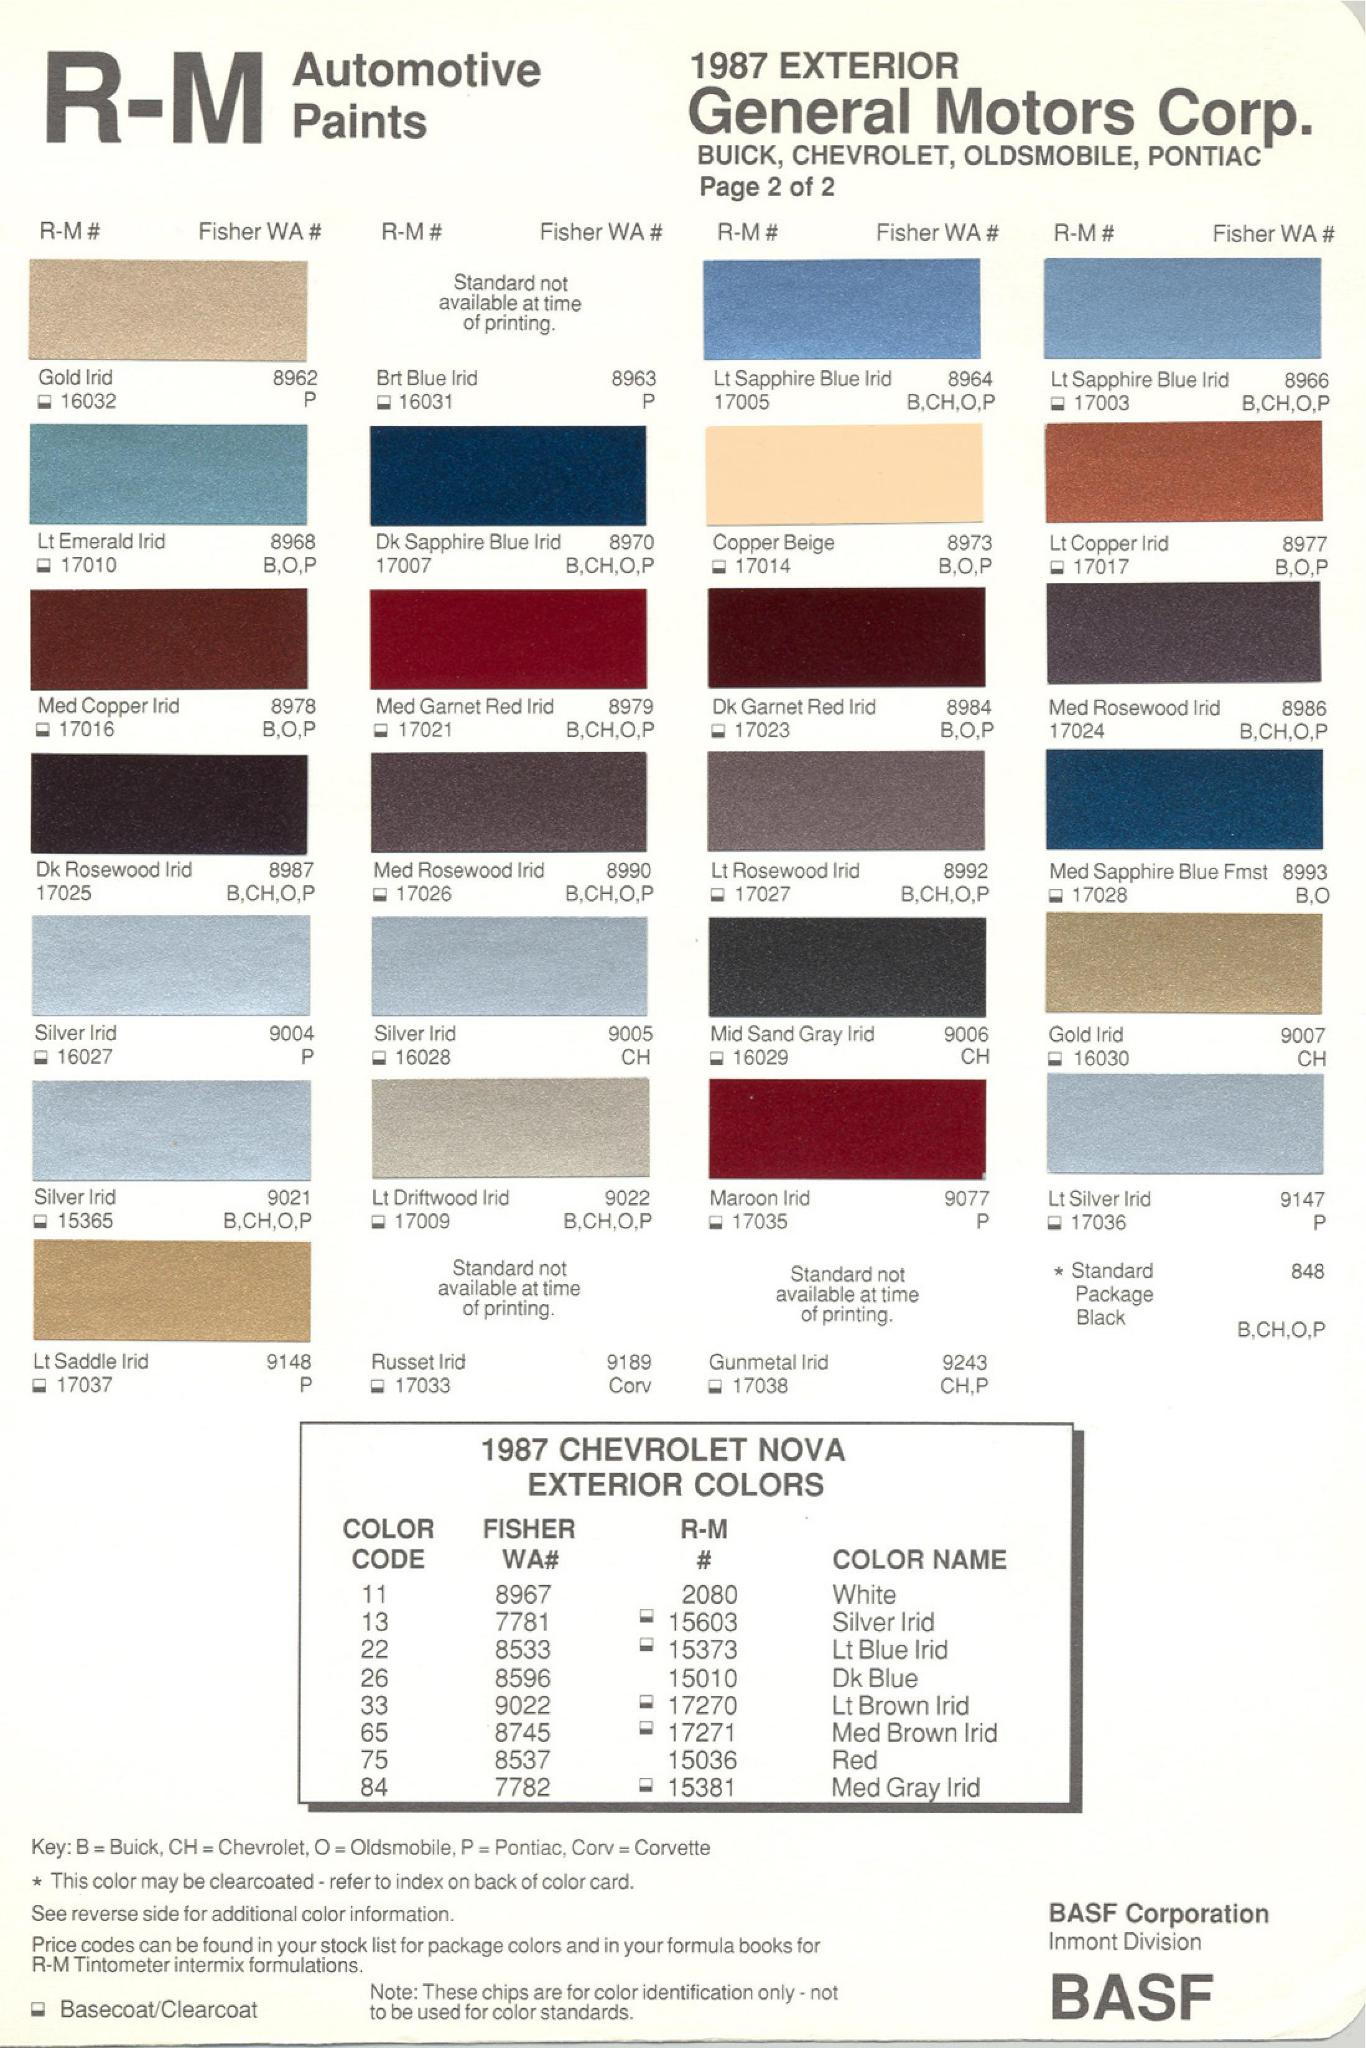 General Motors oem paint swatches, color codes and color names for 1987 vehicles.